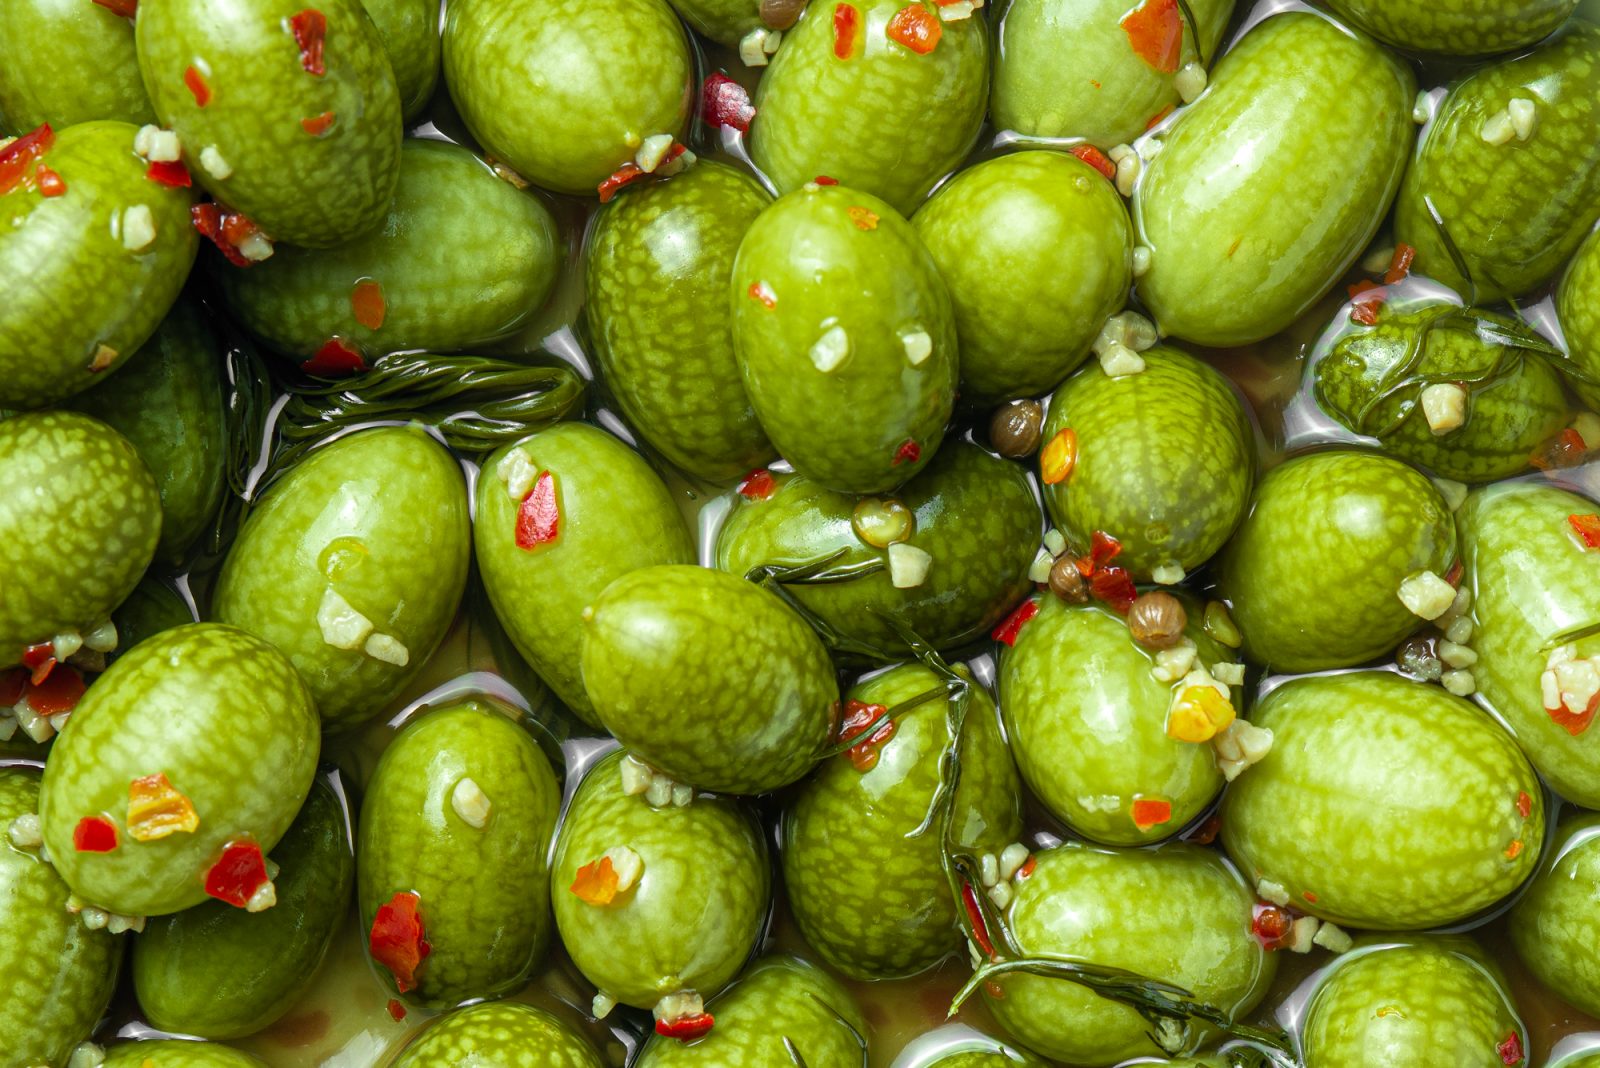 Pickled Cucamelons - Made By Nashish